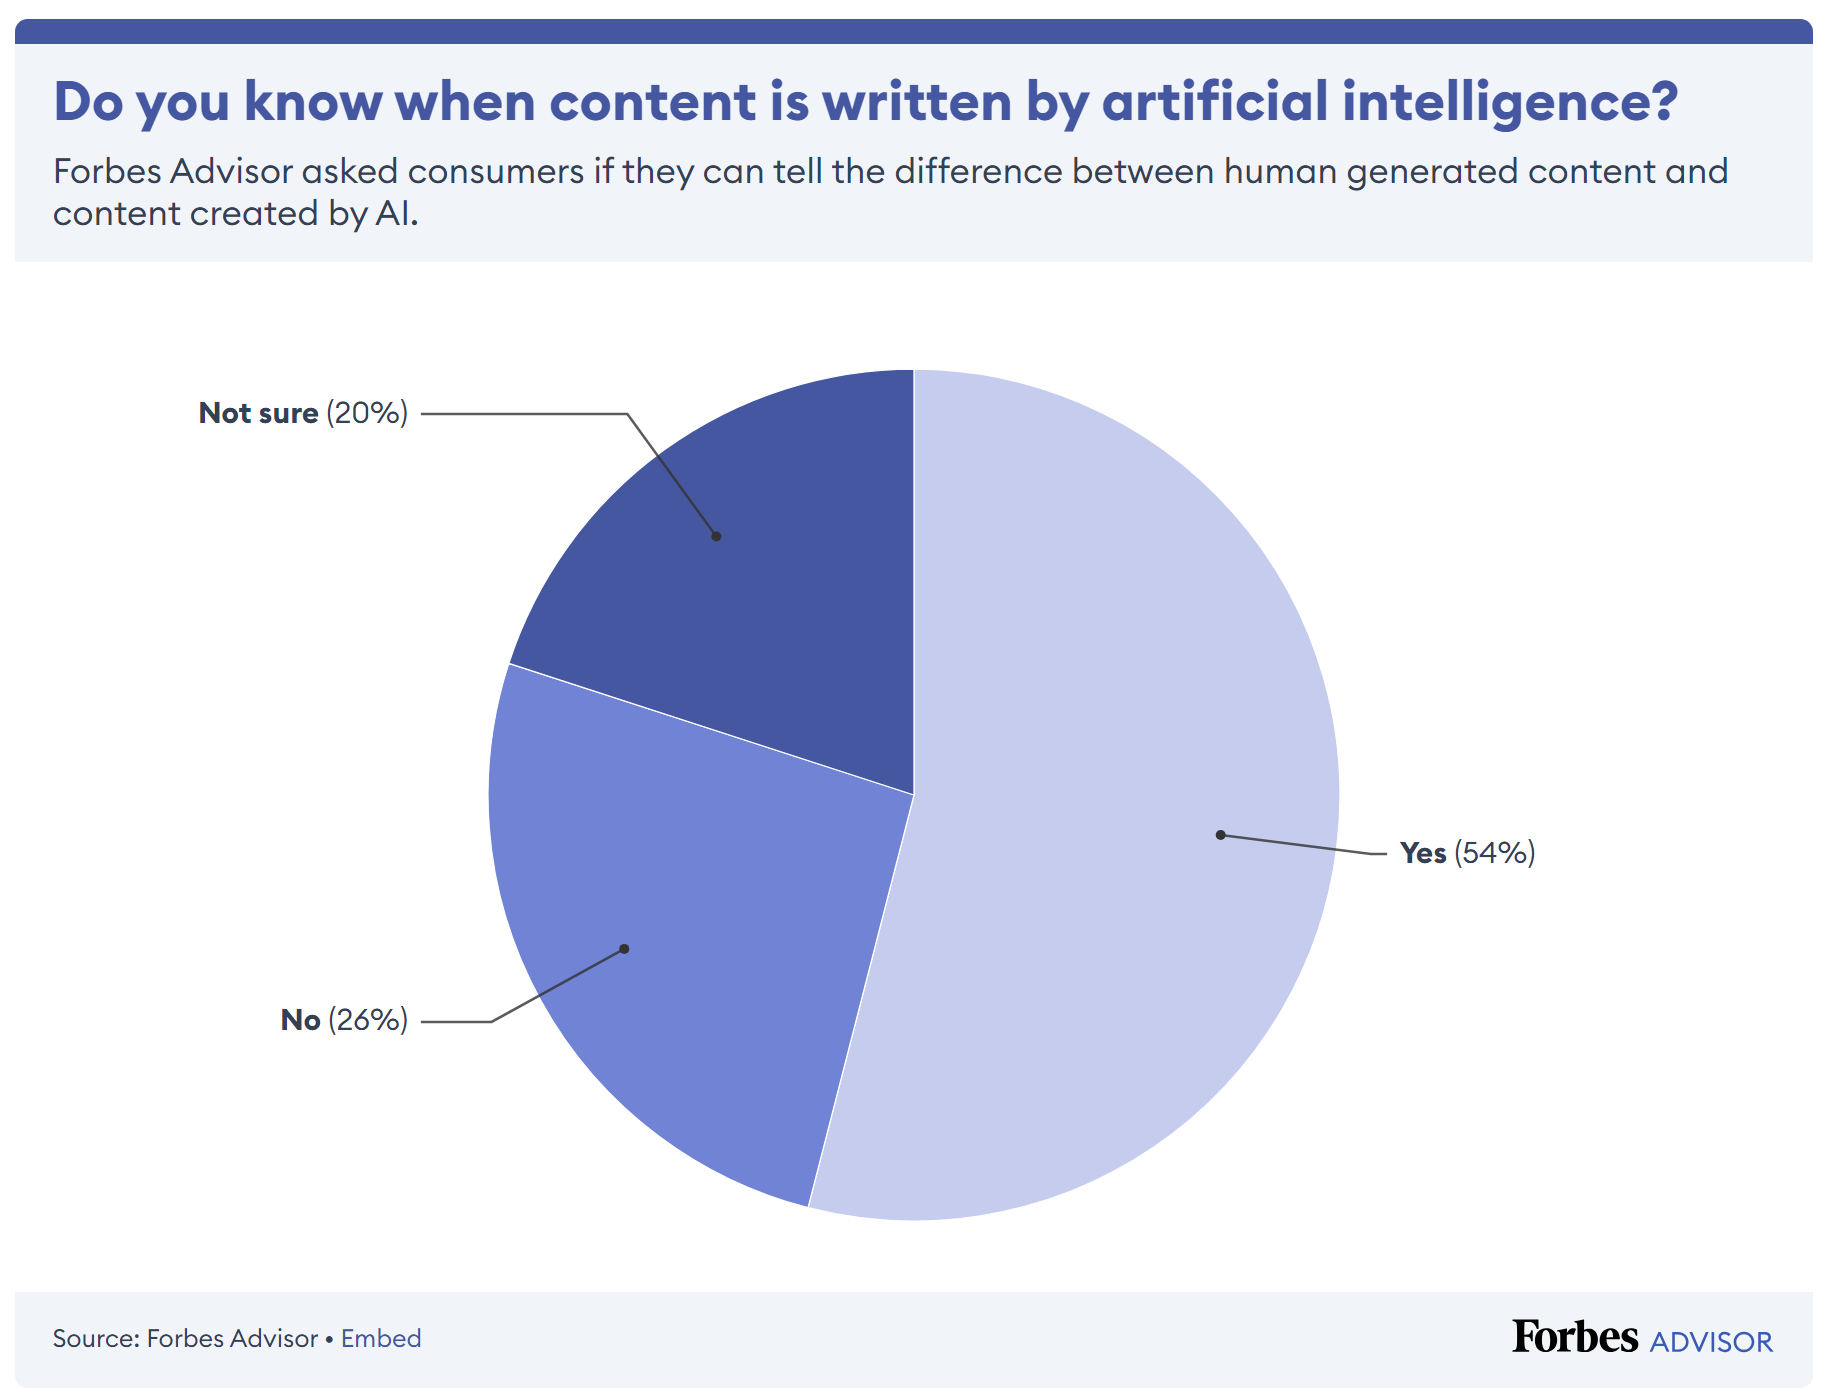 Over 75% Of Consumers Are Concerned About Misinformation From Artificial Intelligence